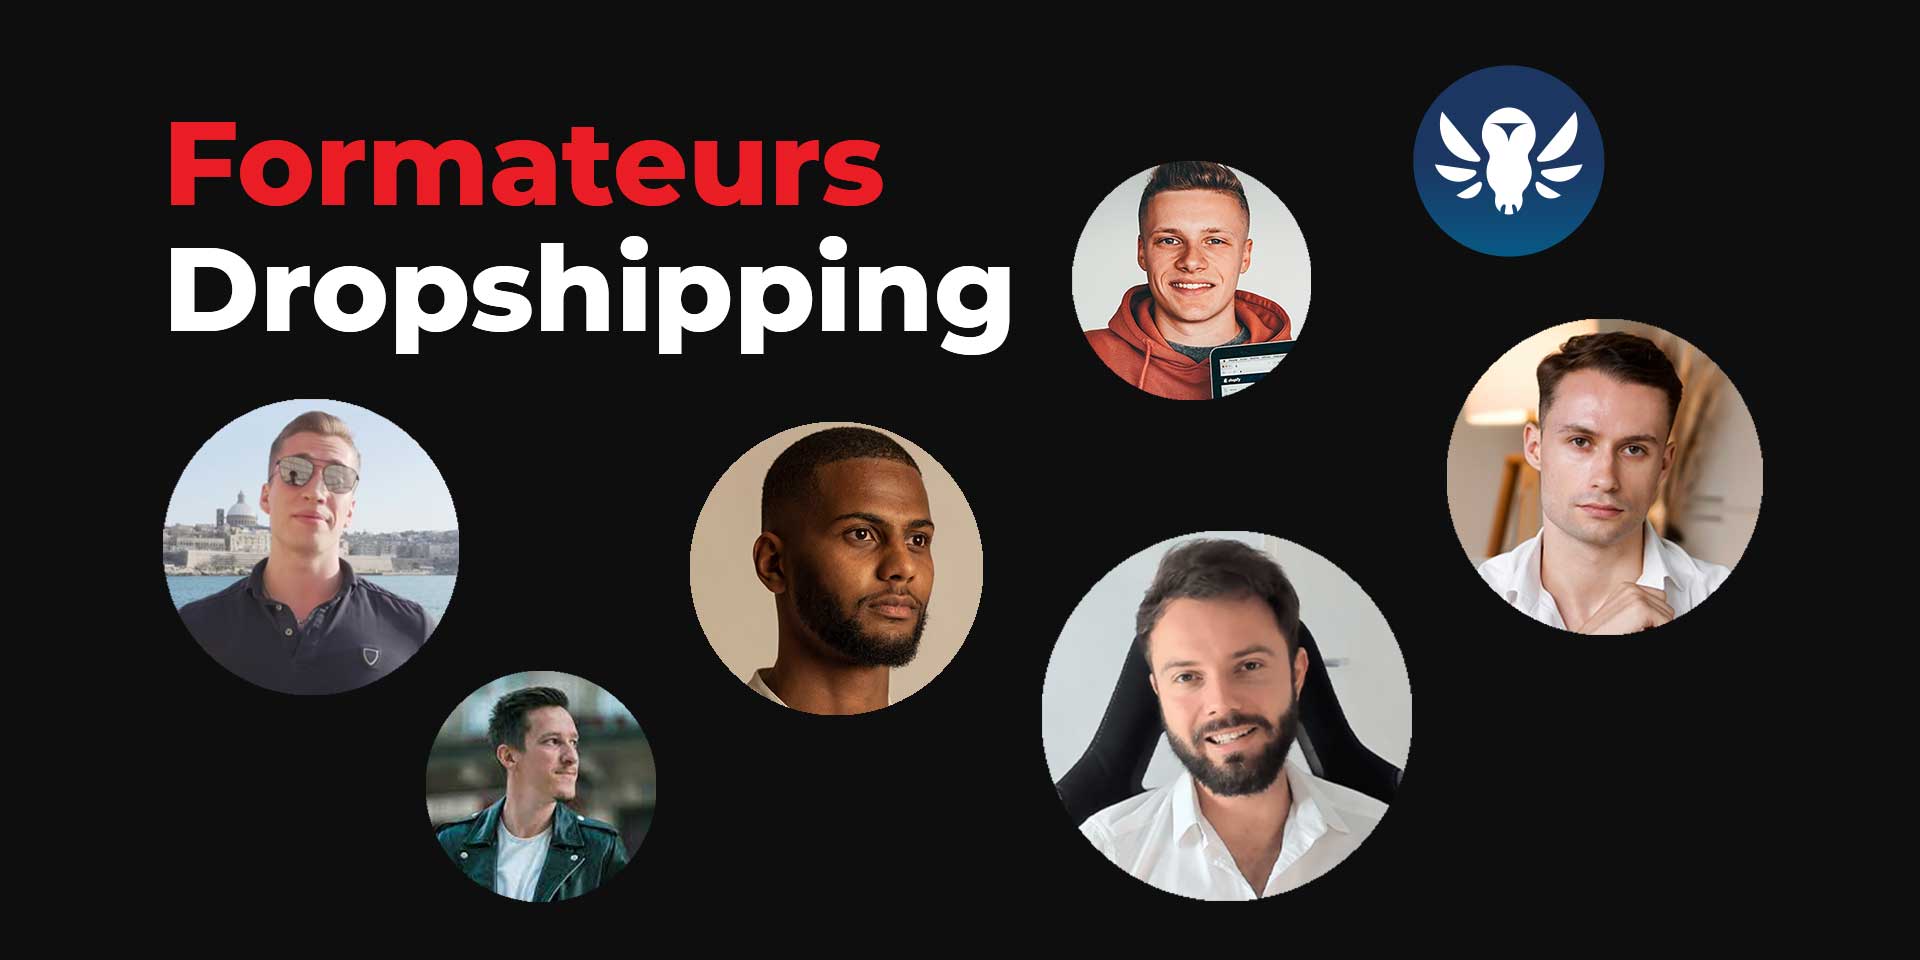 Formateurs dropshipping